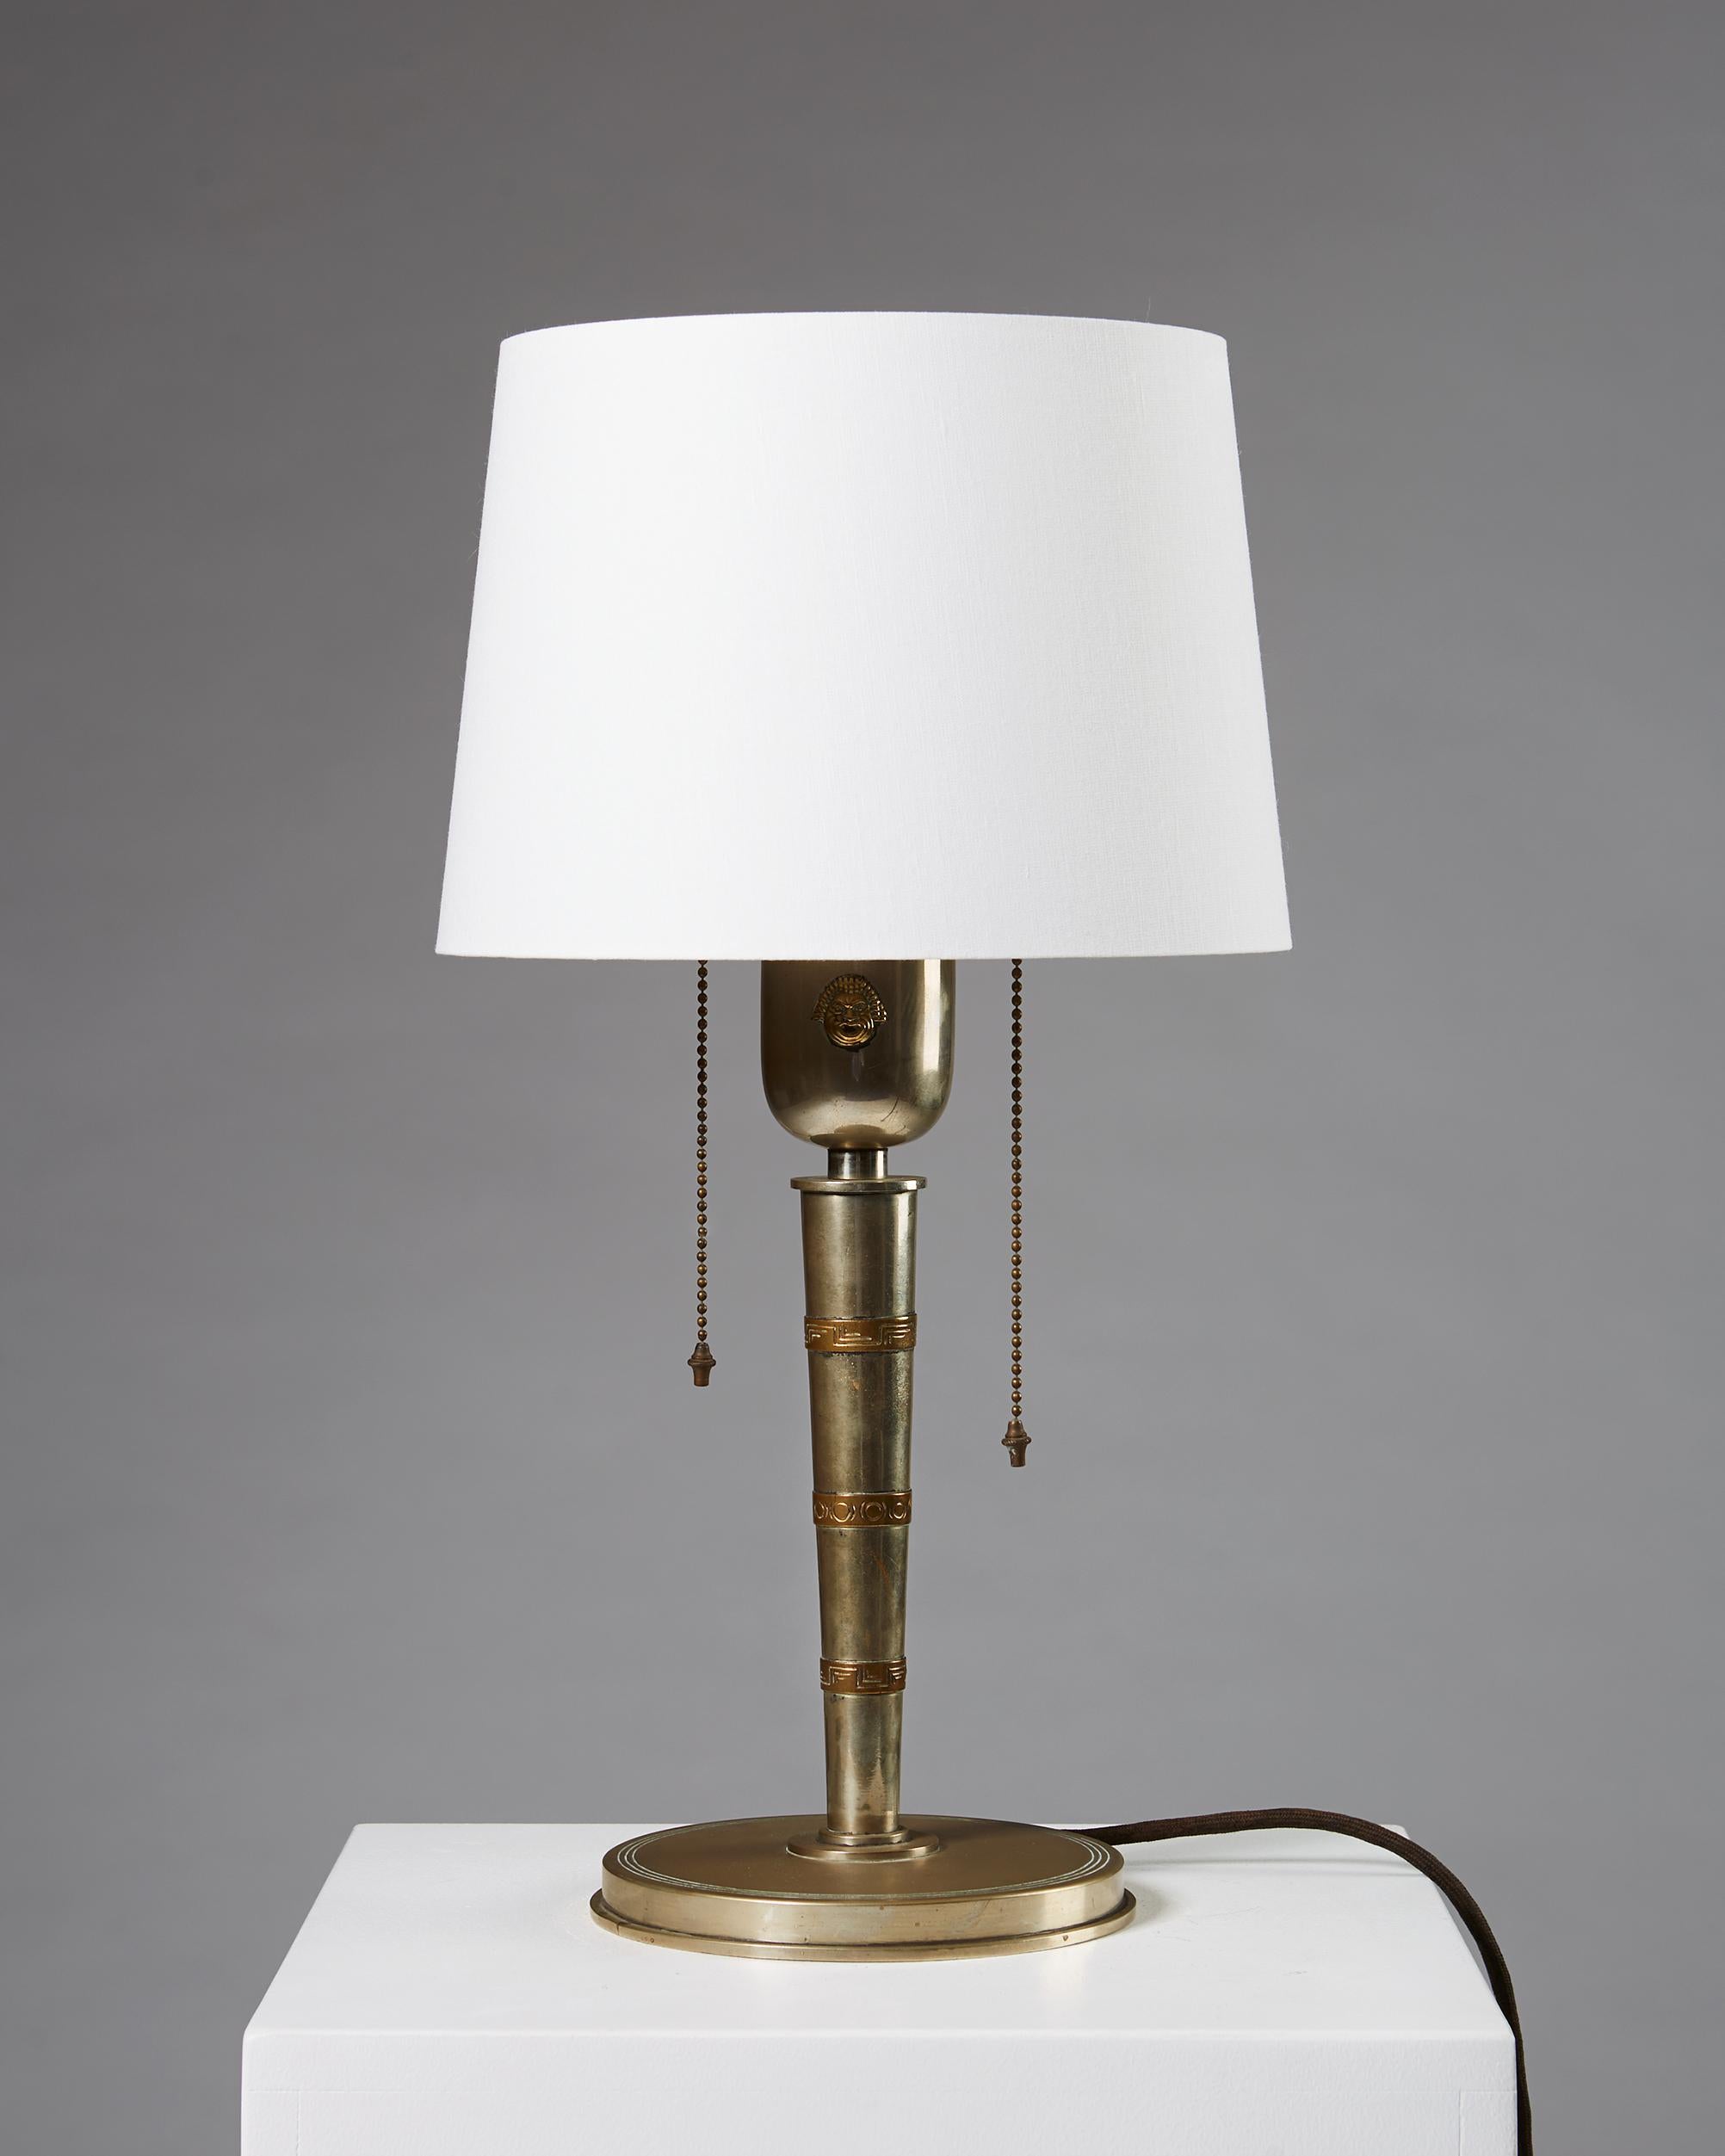 Table lamp designed by Tore Kullander,
Sweden 1930s. 

Pewter and brass with a textile shade.

Measurements:
H: 51 cm / 1' 8 3/4